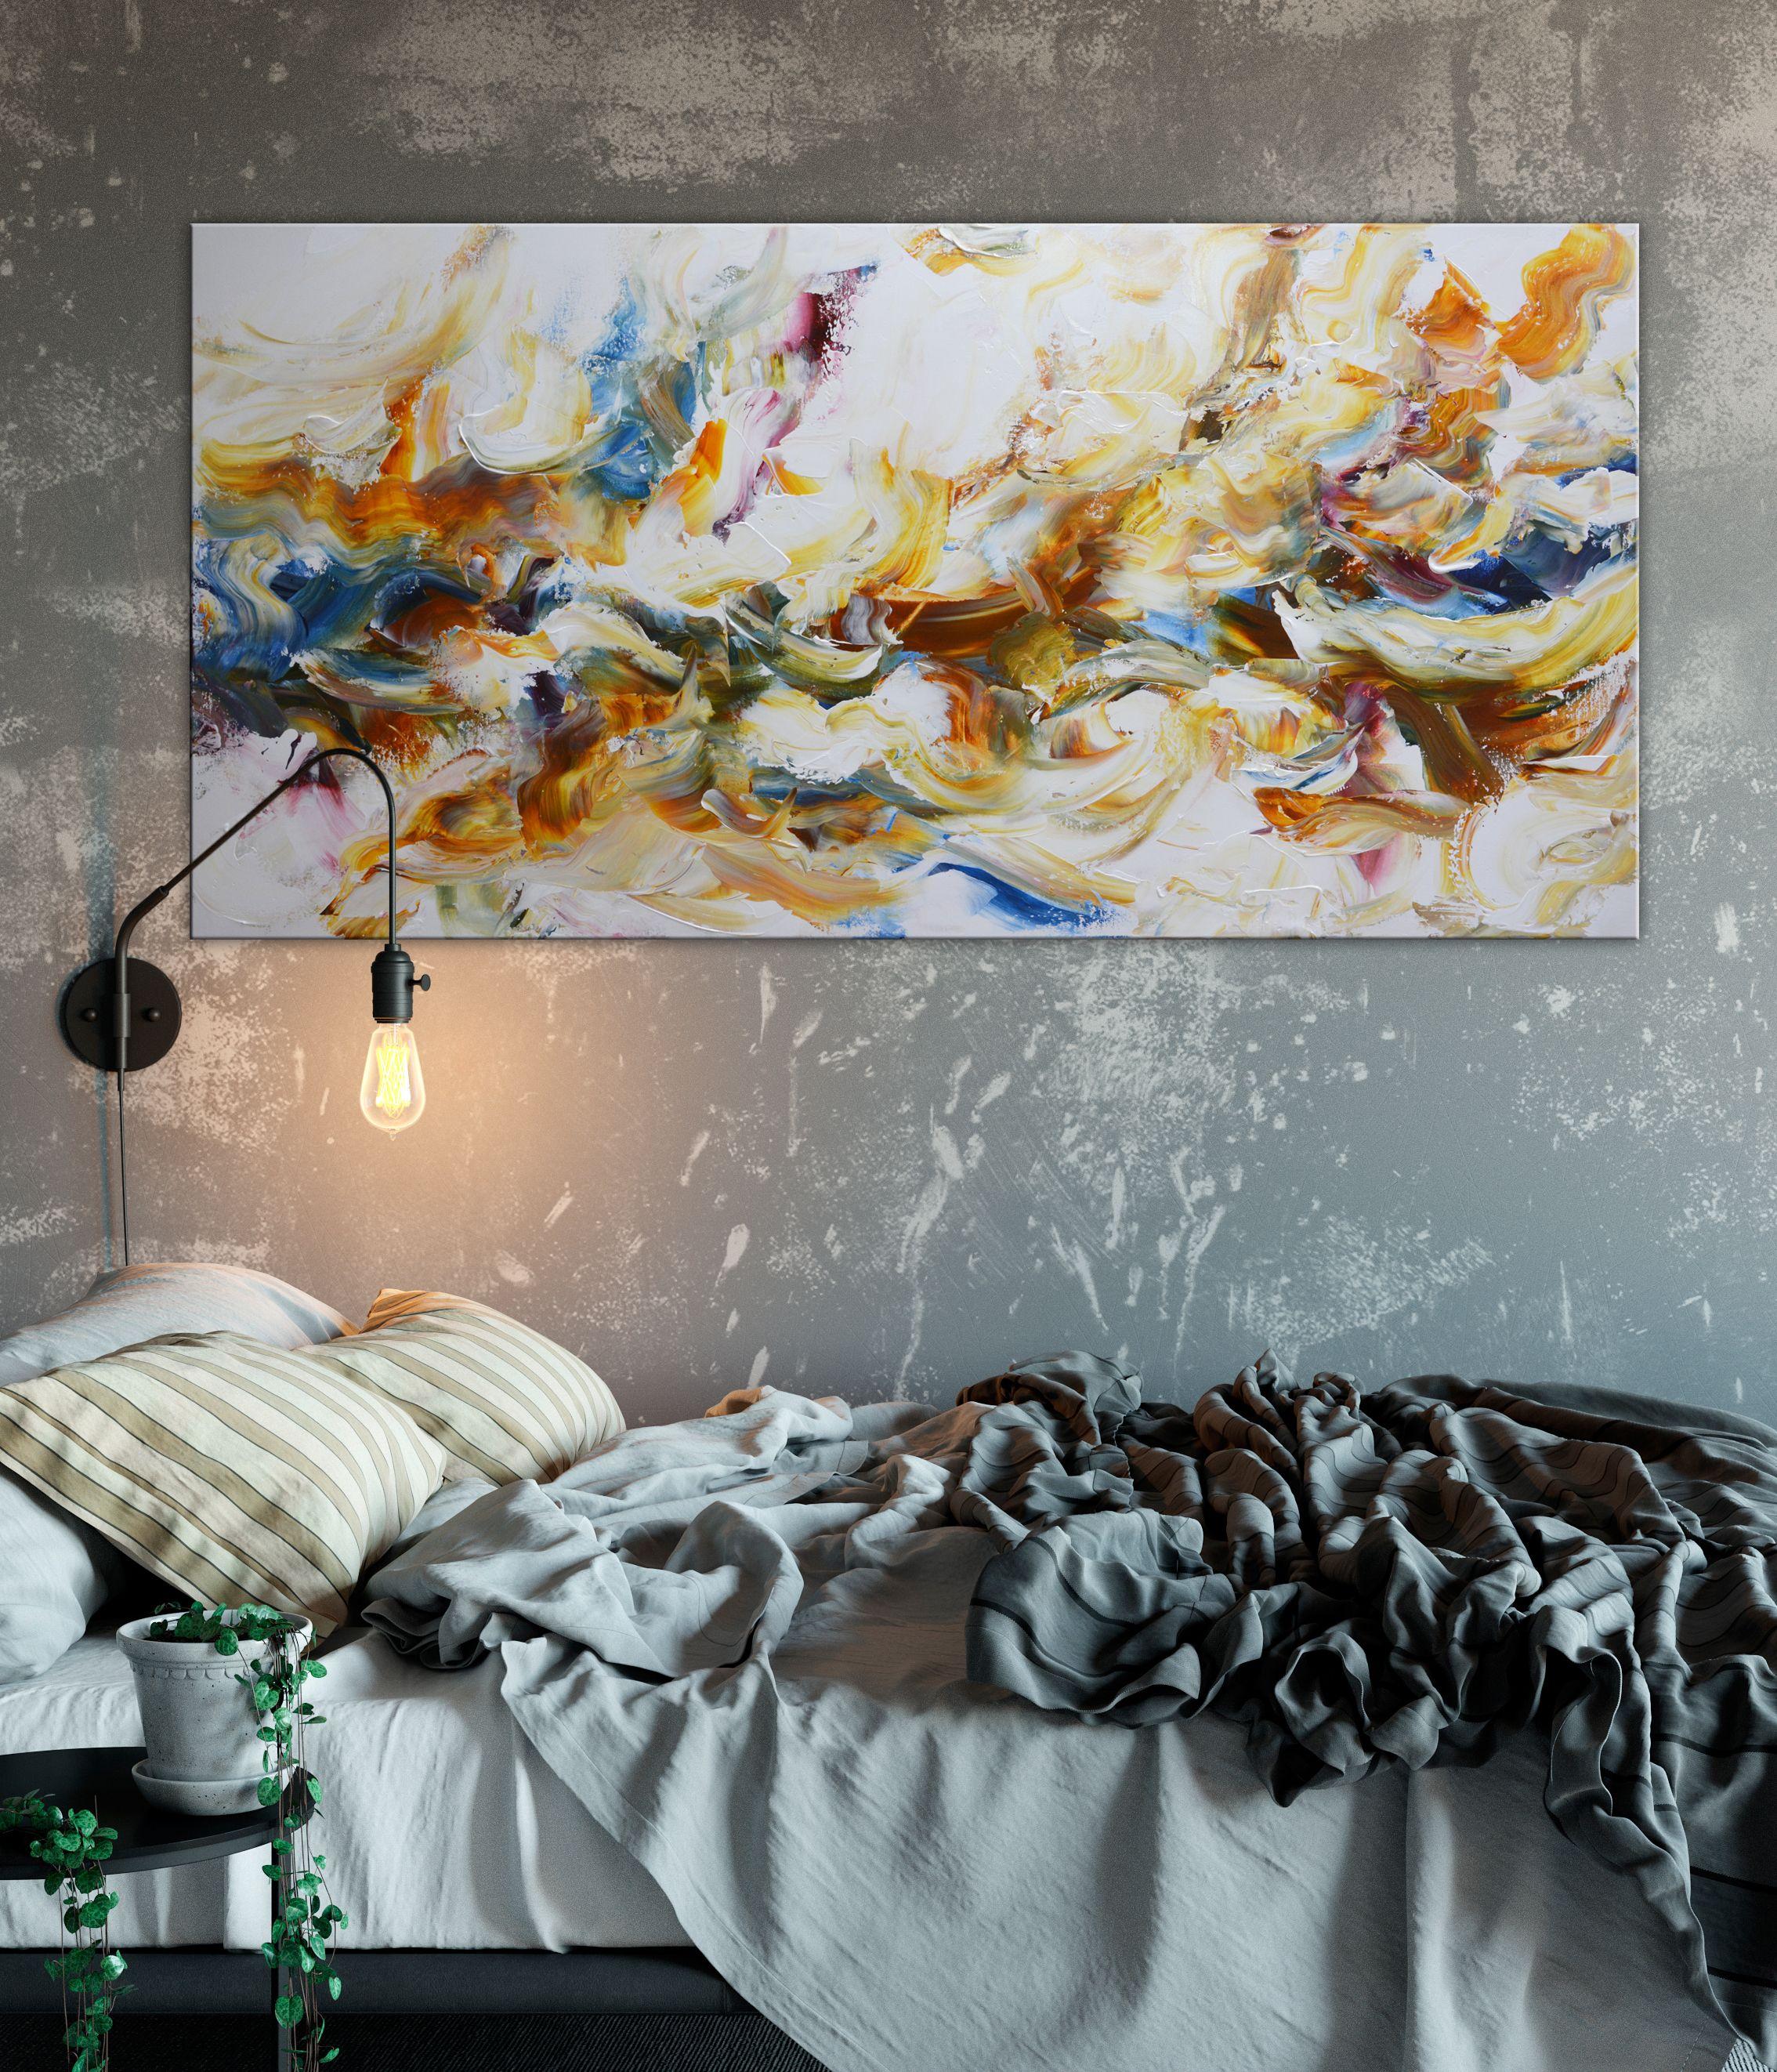 Abstract multicolored painting with orange, yellow, different tones of blues, turquoise and white. Bright colorful and bold tones create a happy and peaceful mood.  - Title: Sea lavender  - Medium: mixed media  - Support: stretched canvas, ready to